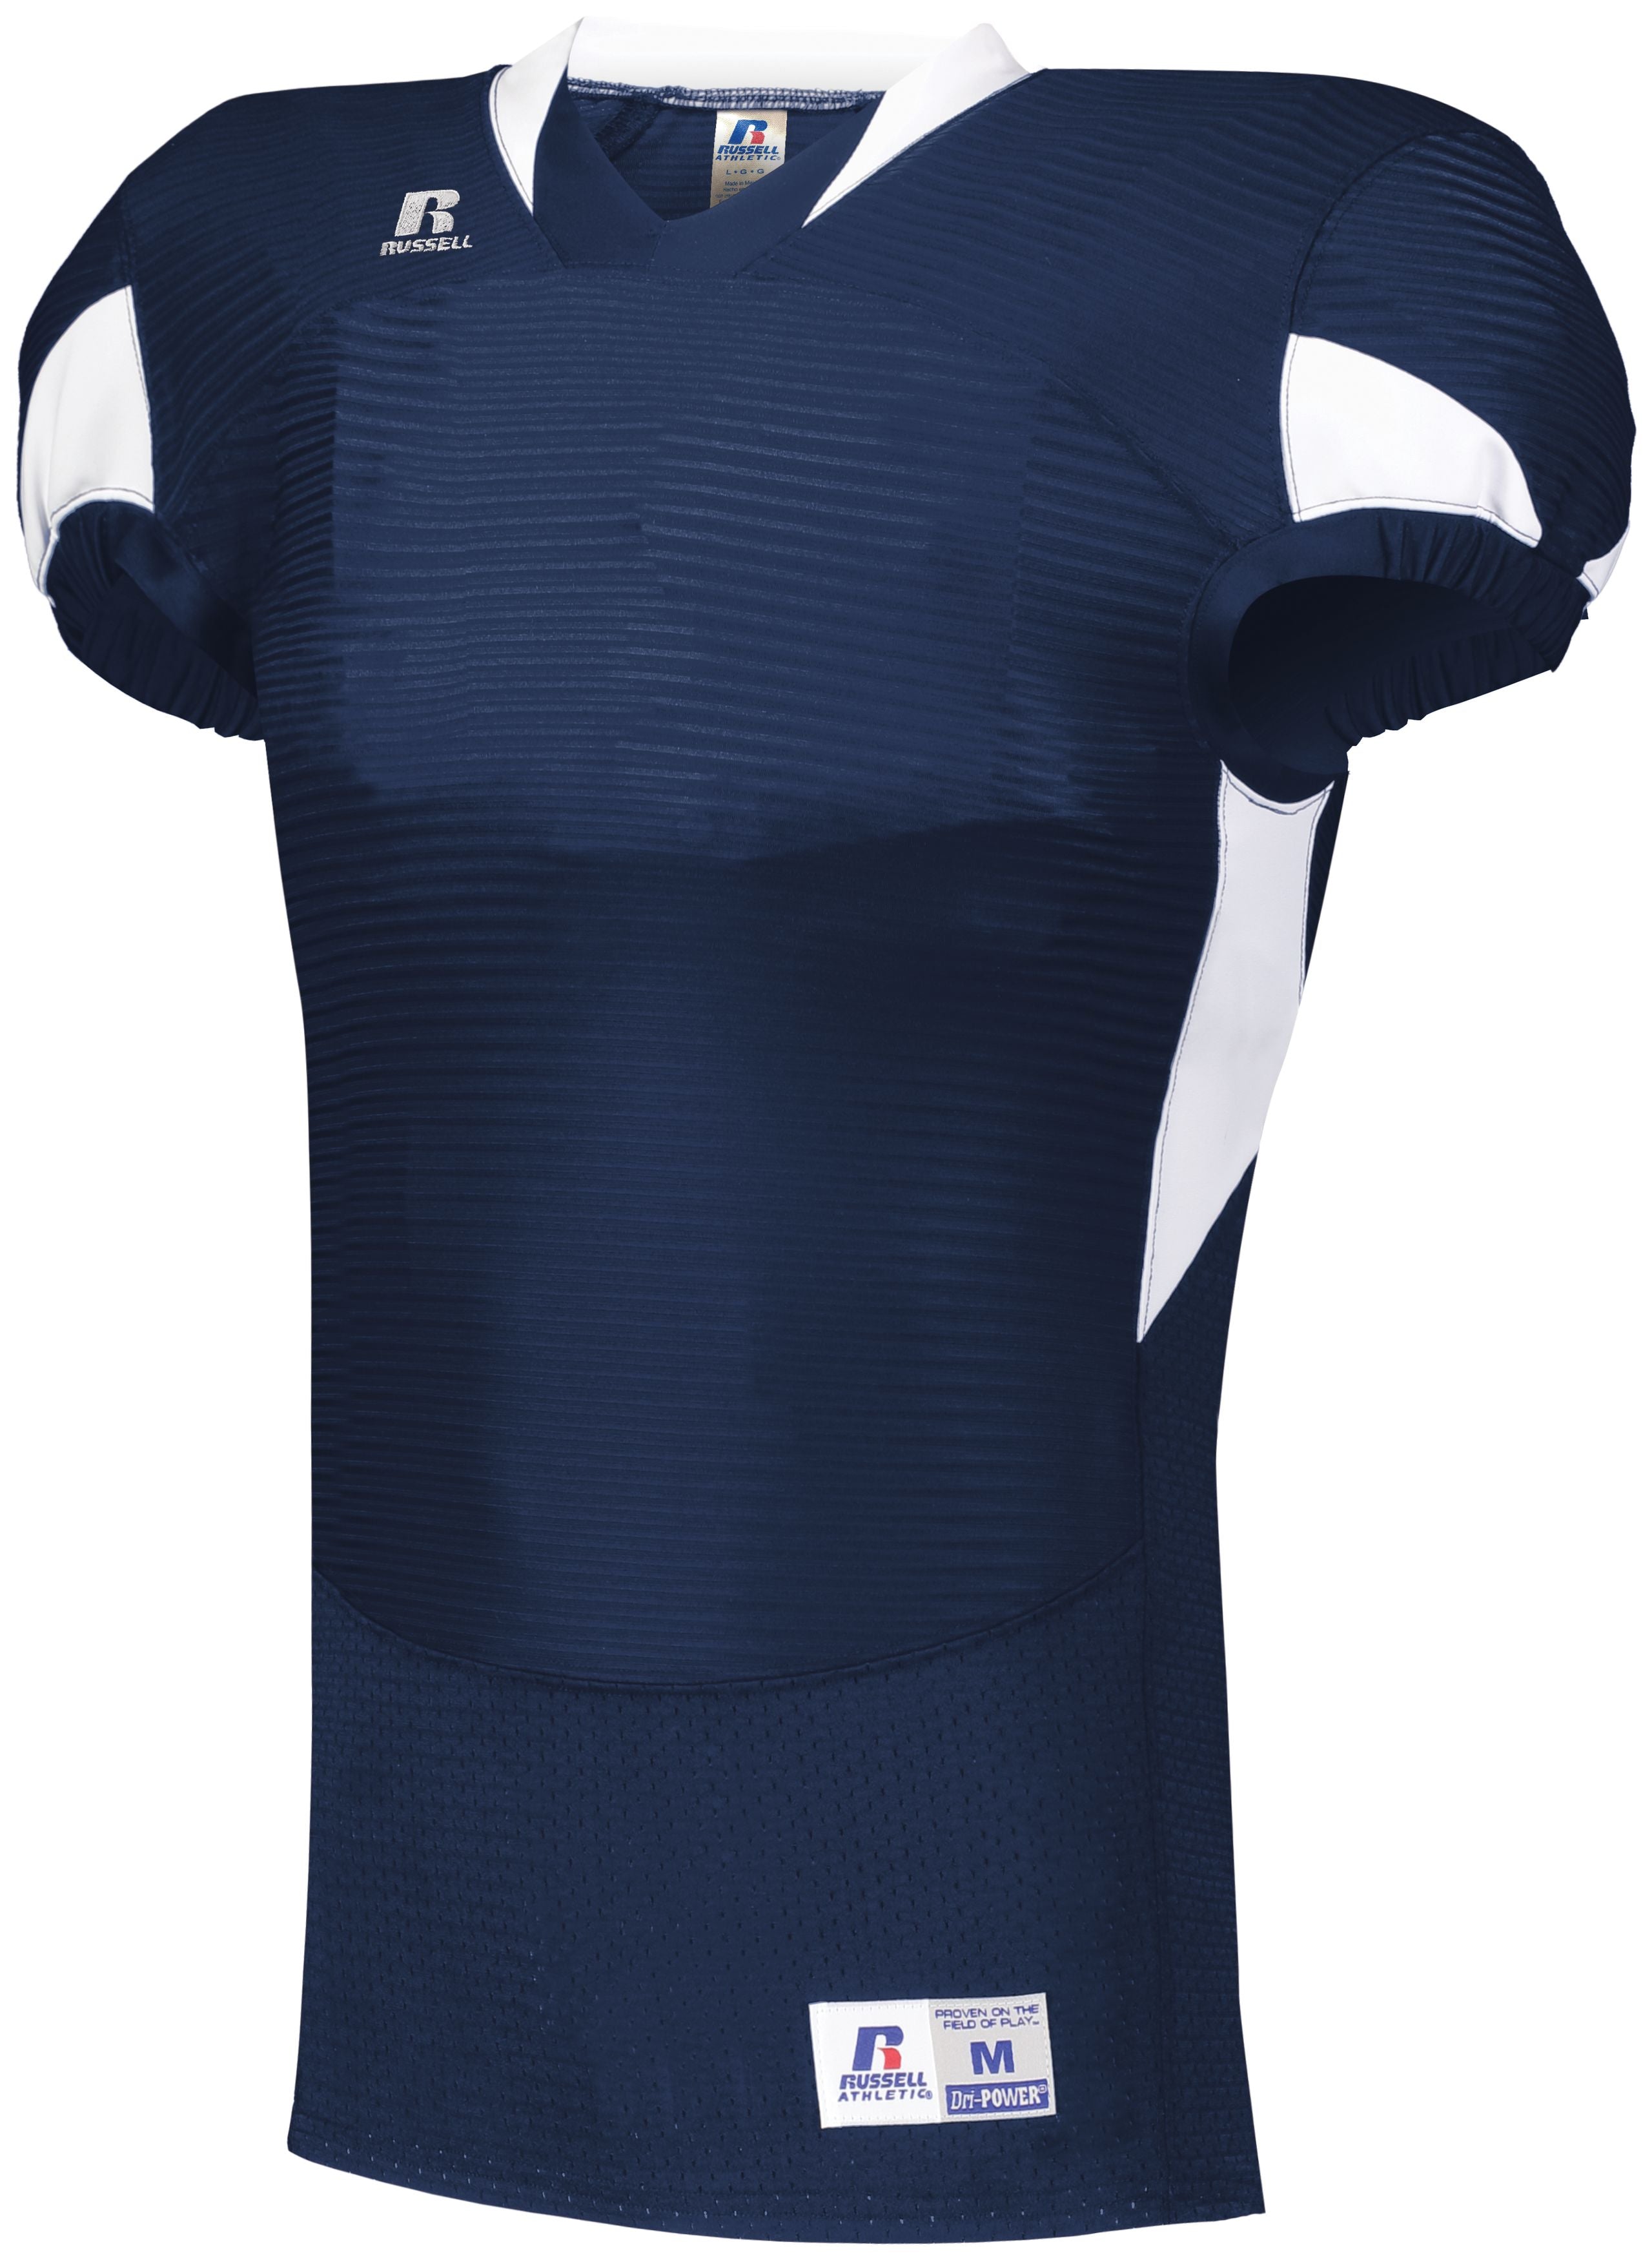 Russell Athletic Waist Length Football Jersey in Navy/White  -Part of the Adult, Adult-Jersey, Football, Russell-Athletic-Products, Shirts, All-Sports, All-Sports-1 product lines at KanaleyCreations.com